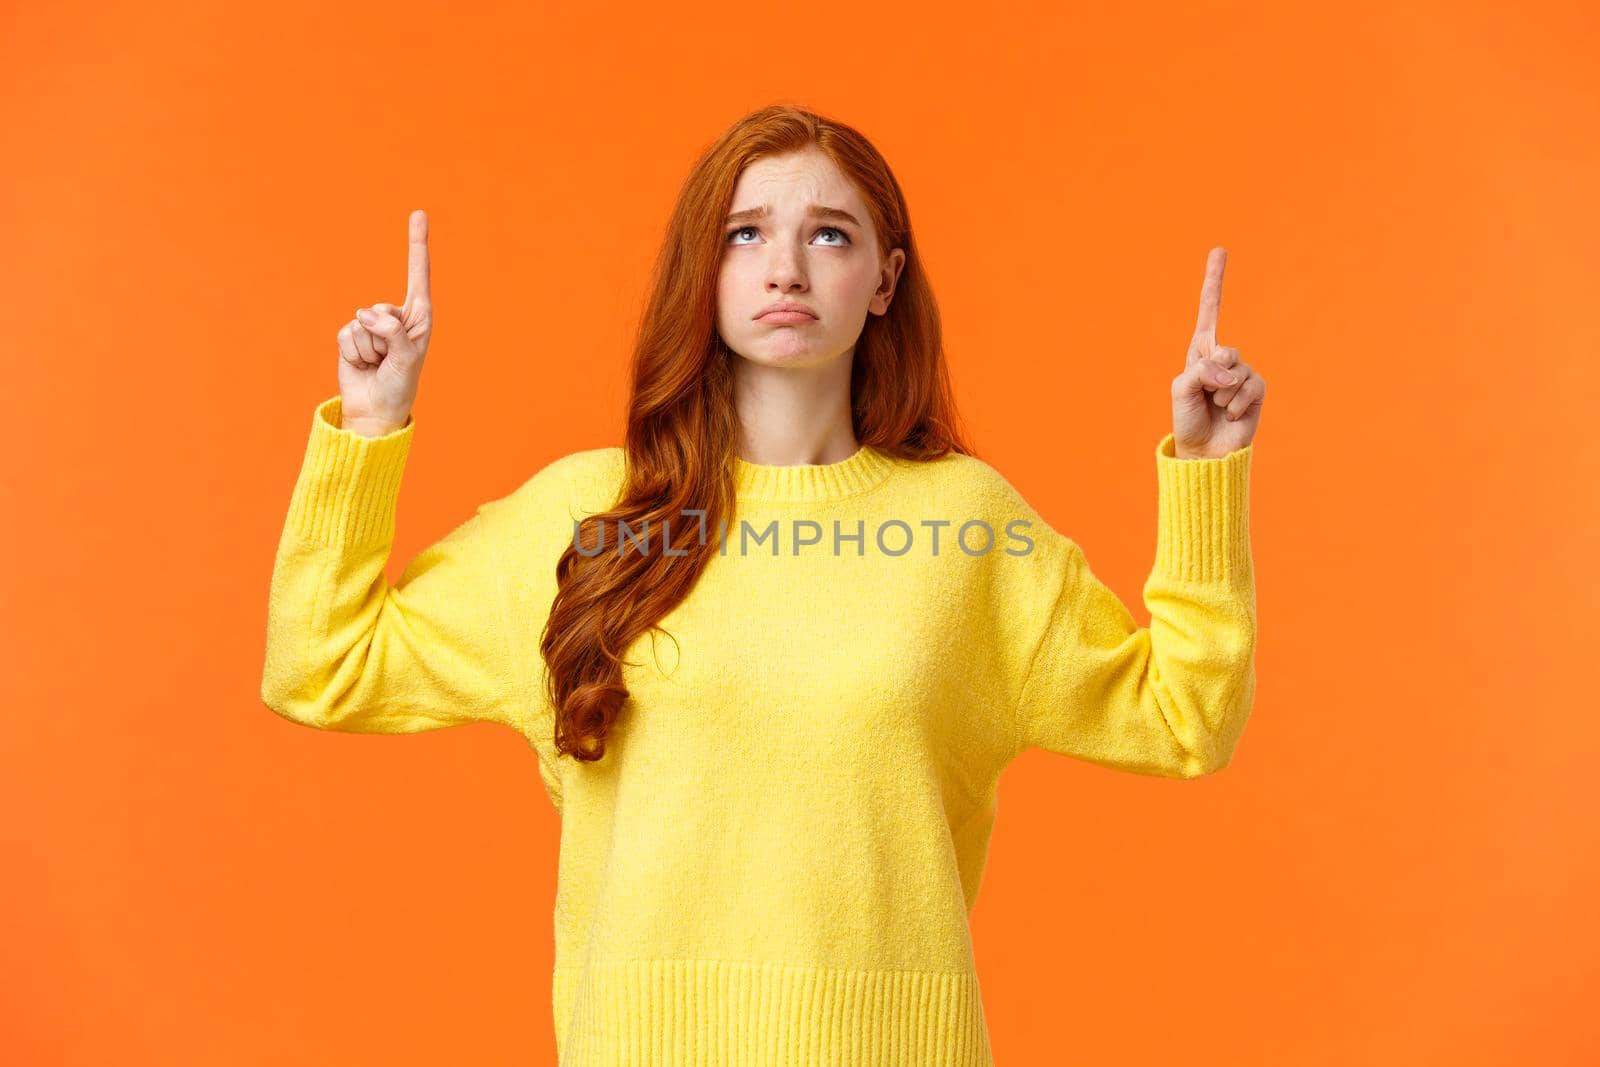 Sad and unhappy sulking redhead girl in yellow sweater, unsatisfied, look gloomy on christmas holidays, pointing and looking up envy or distressed, cant have desired gift, standing orange background.